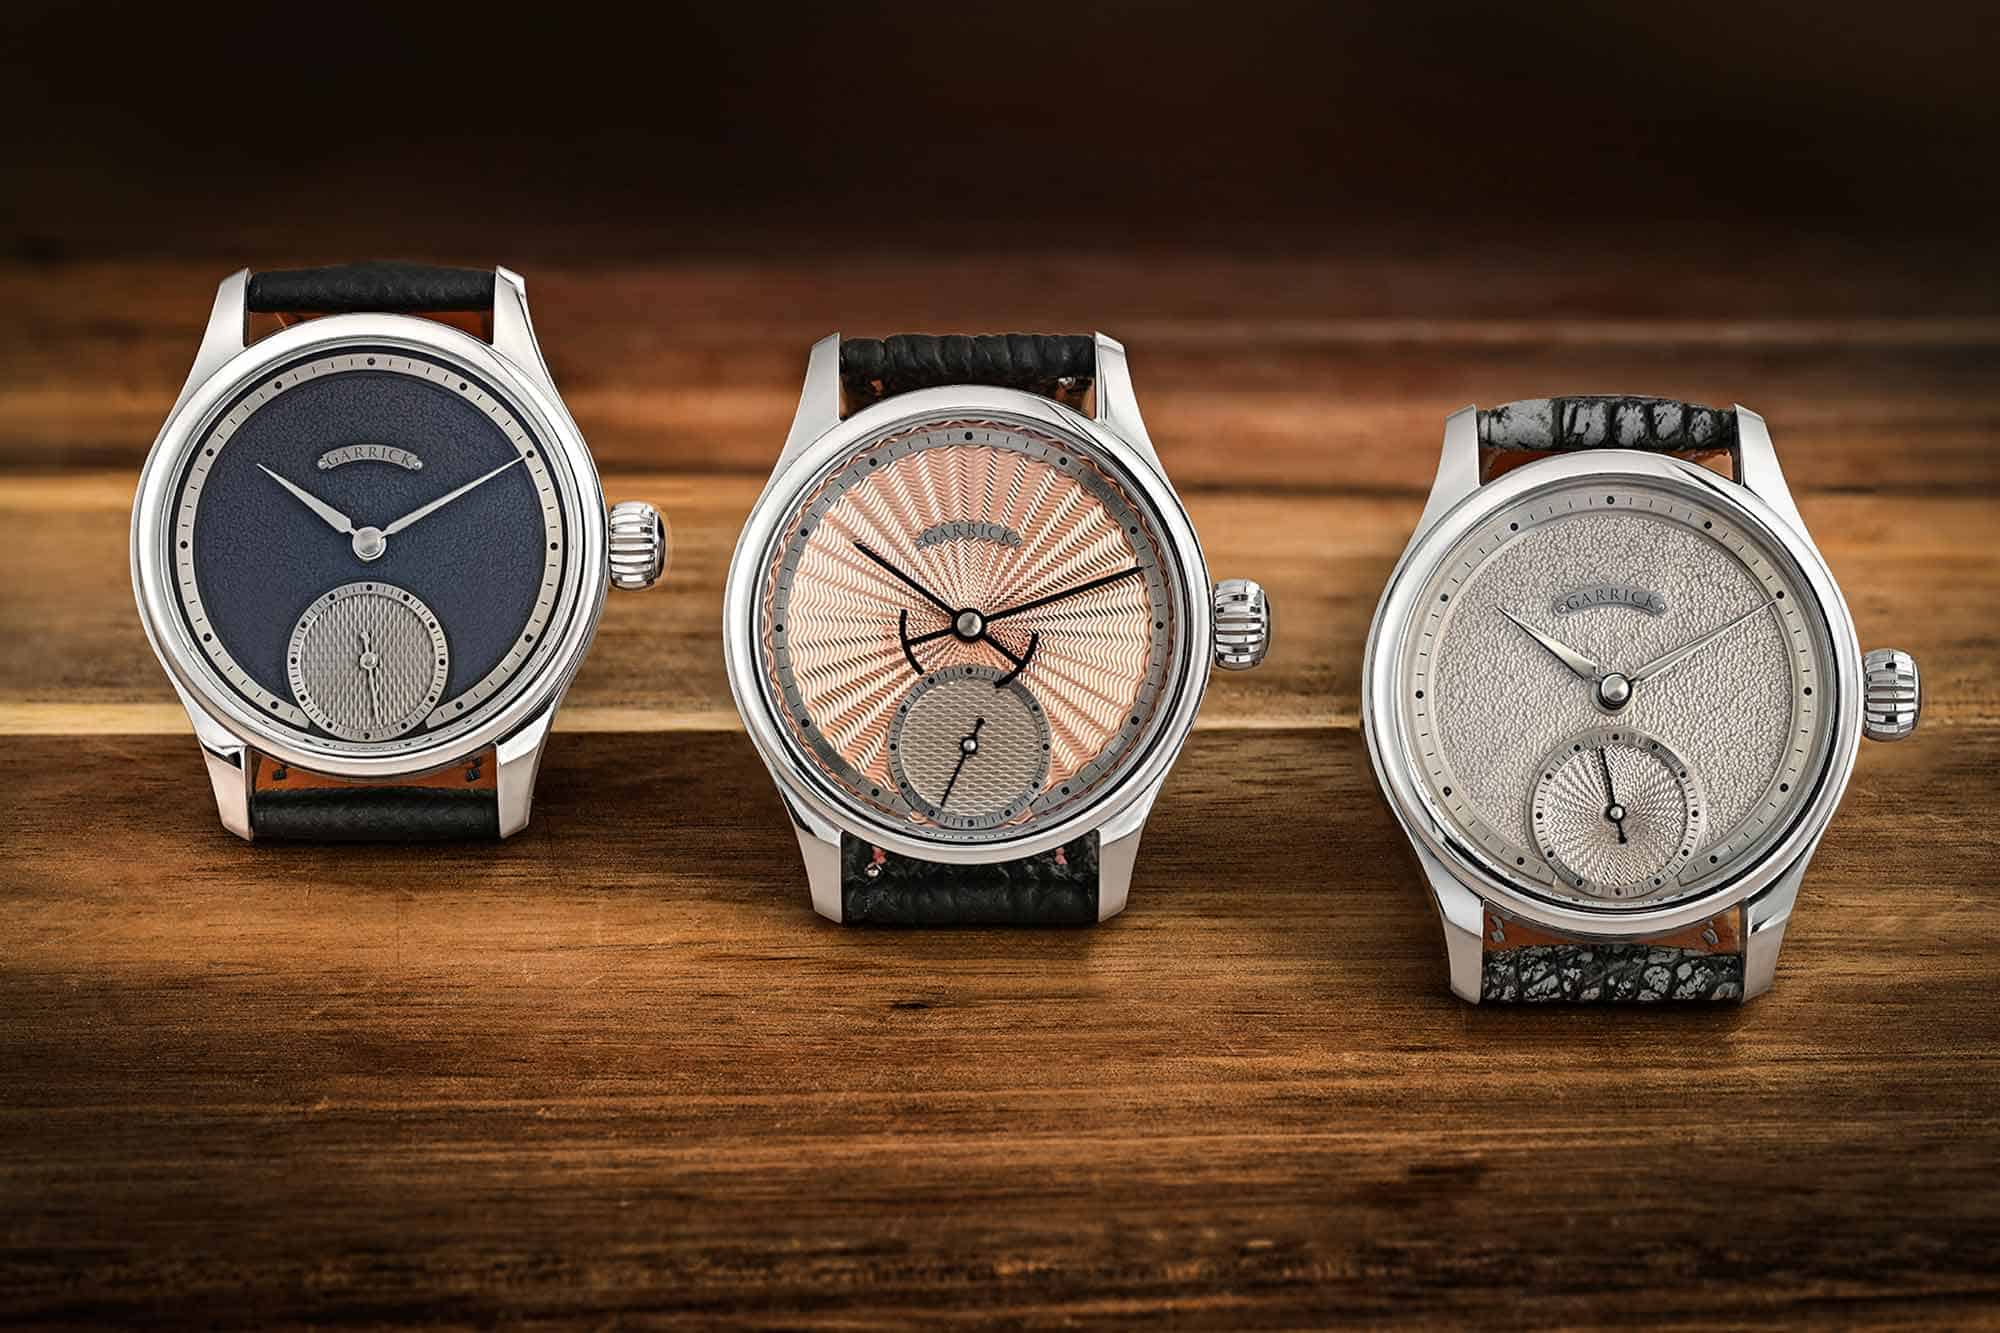 Garrick Introduces the S6, an Evolution of their Entry Level Watch - Worn &  Wound